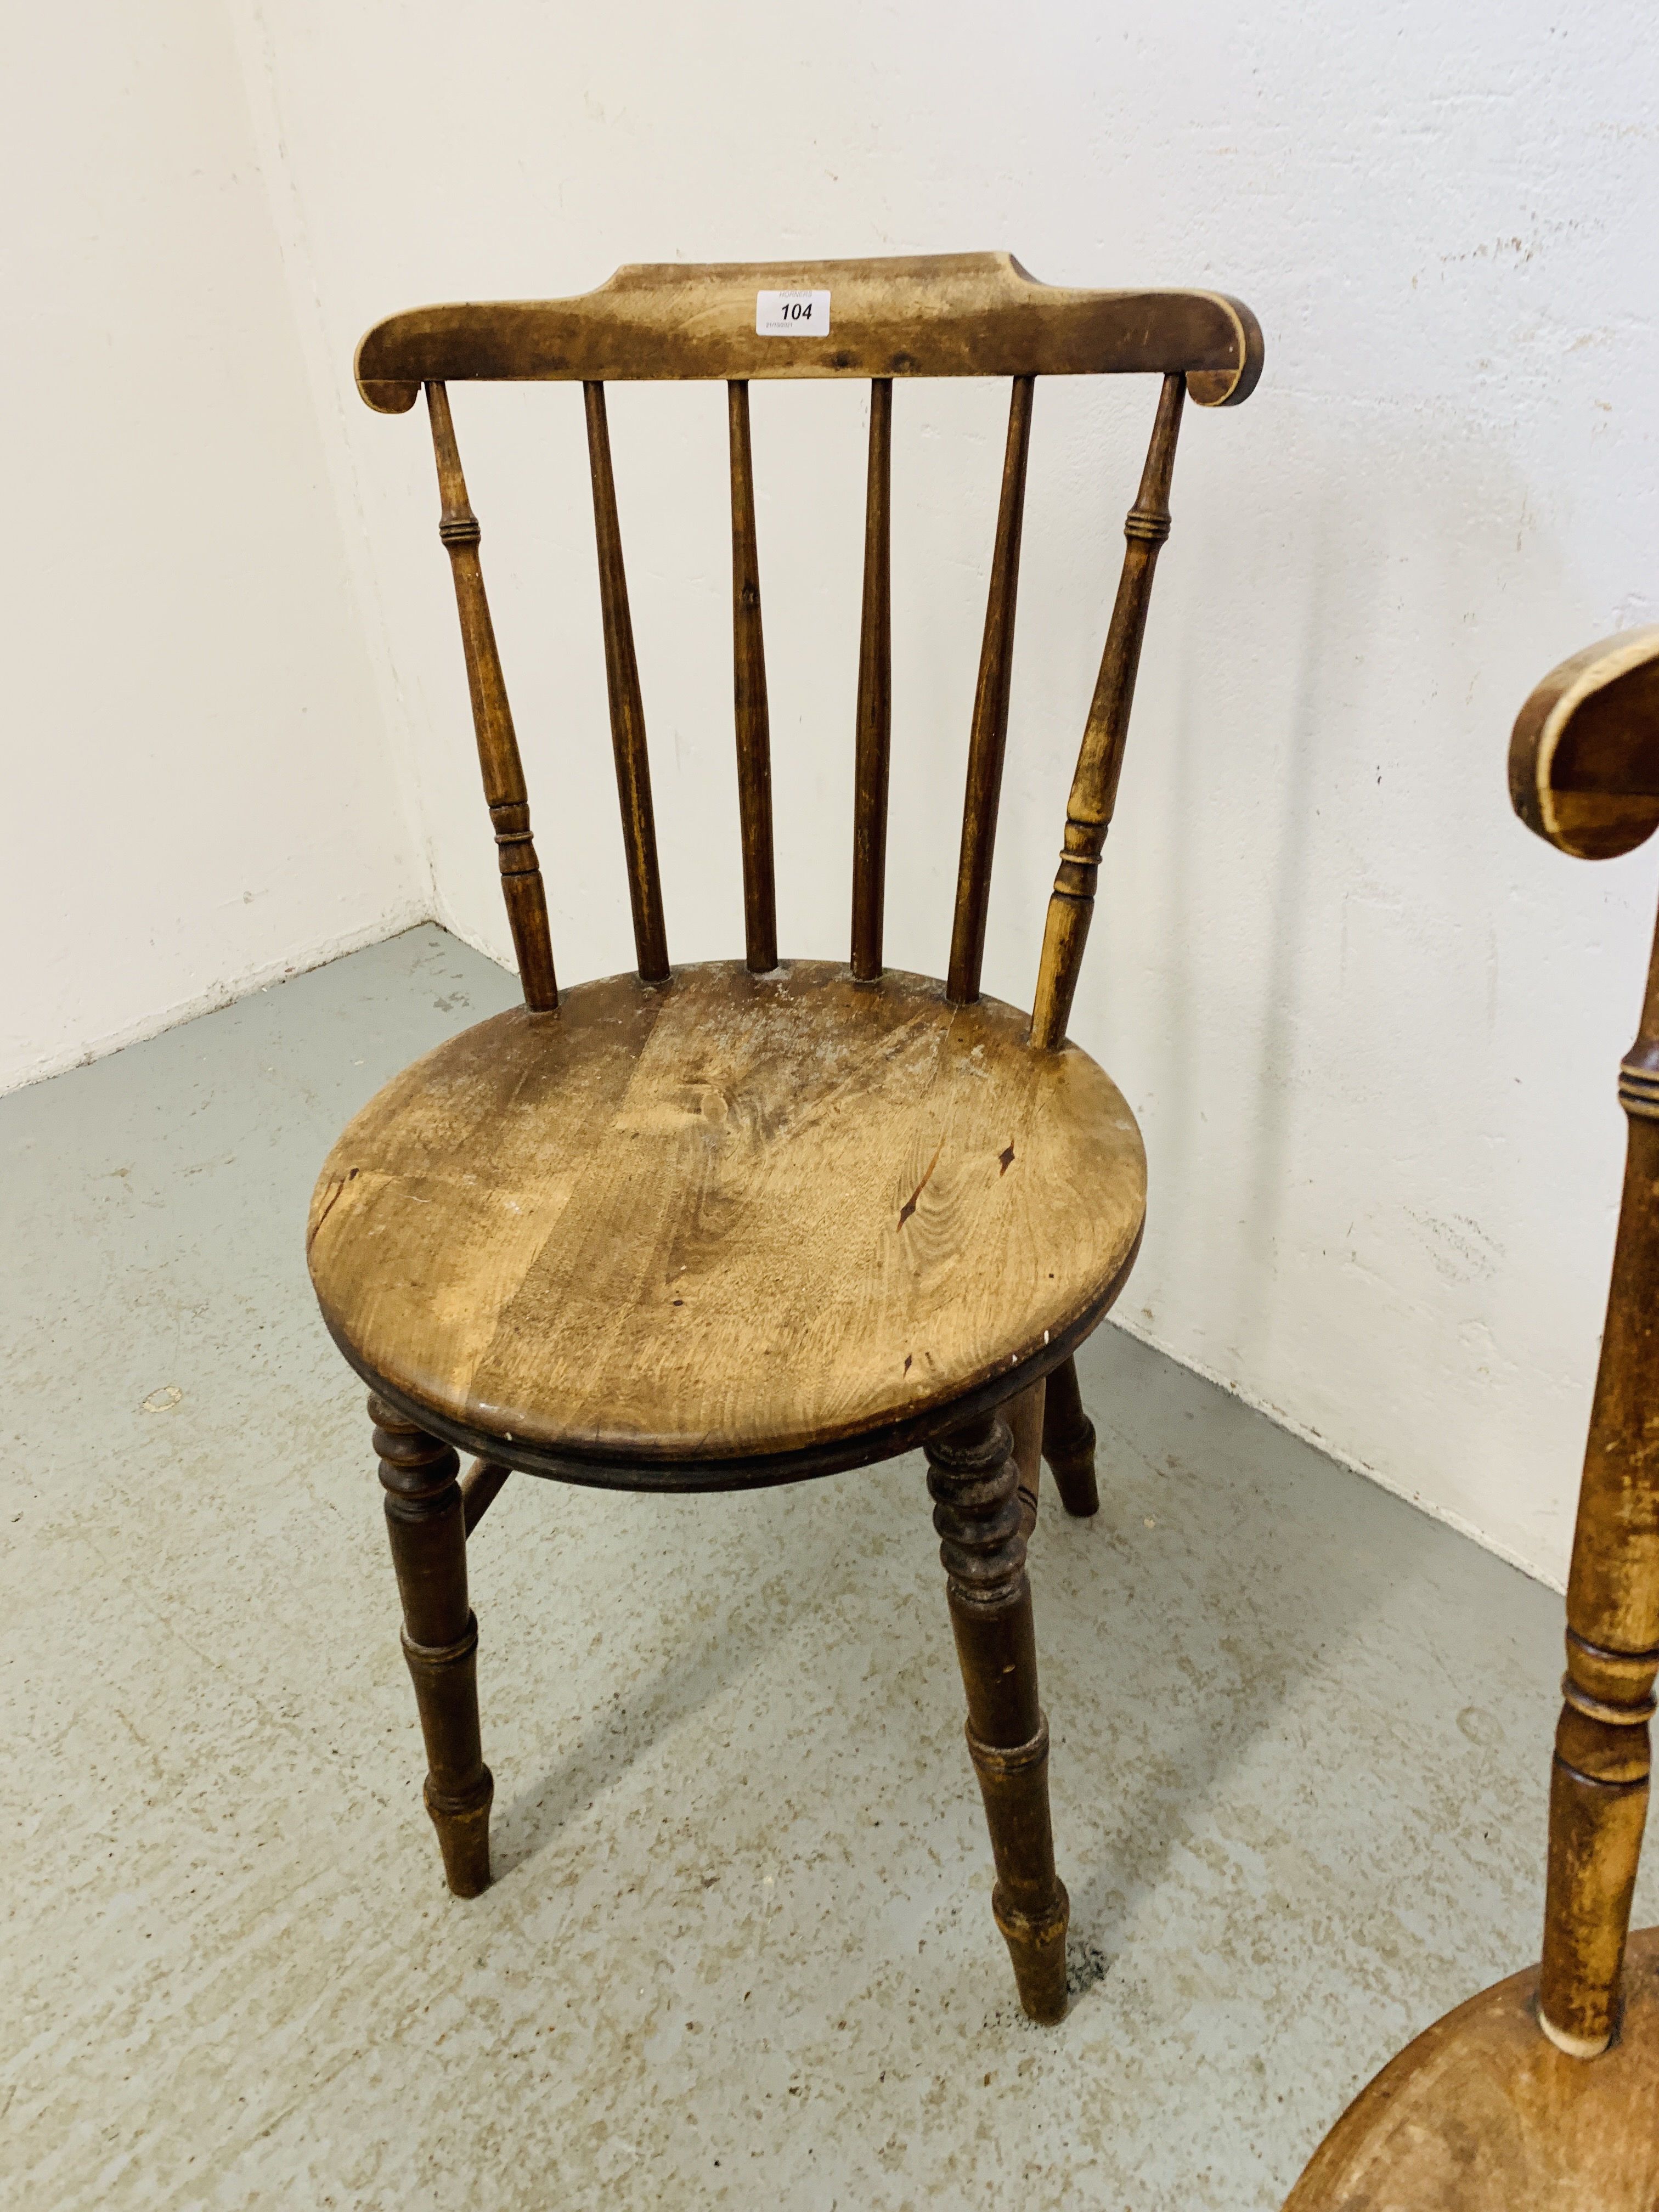 3 CHARACTER PENNY SEAT STICKBACK CHAIRS WITH TURNED LEGS A/F CONDITION - Image 8 of 8